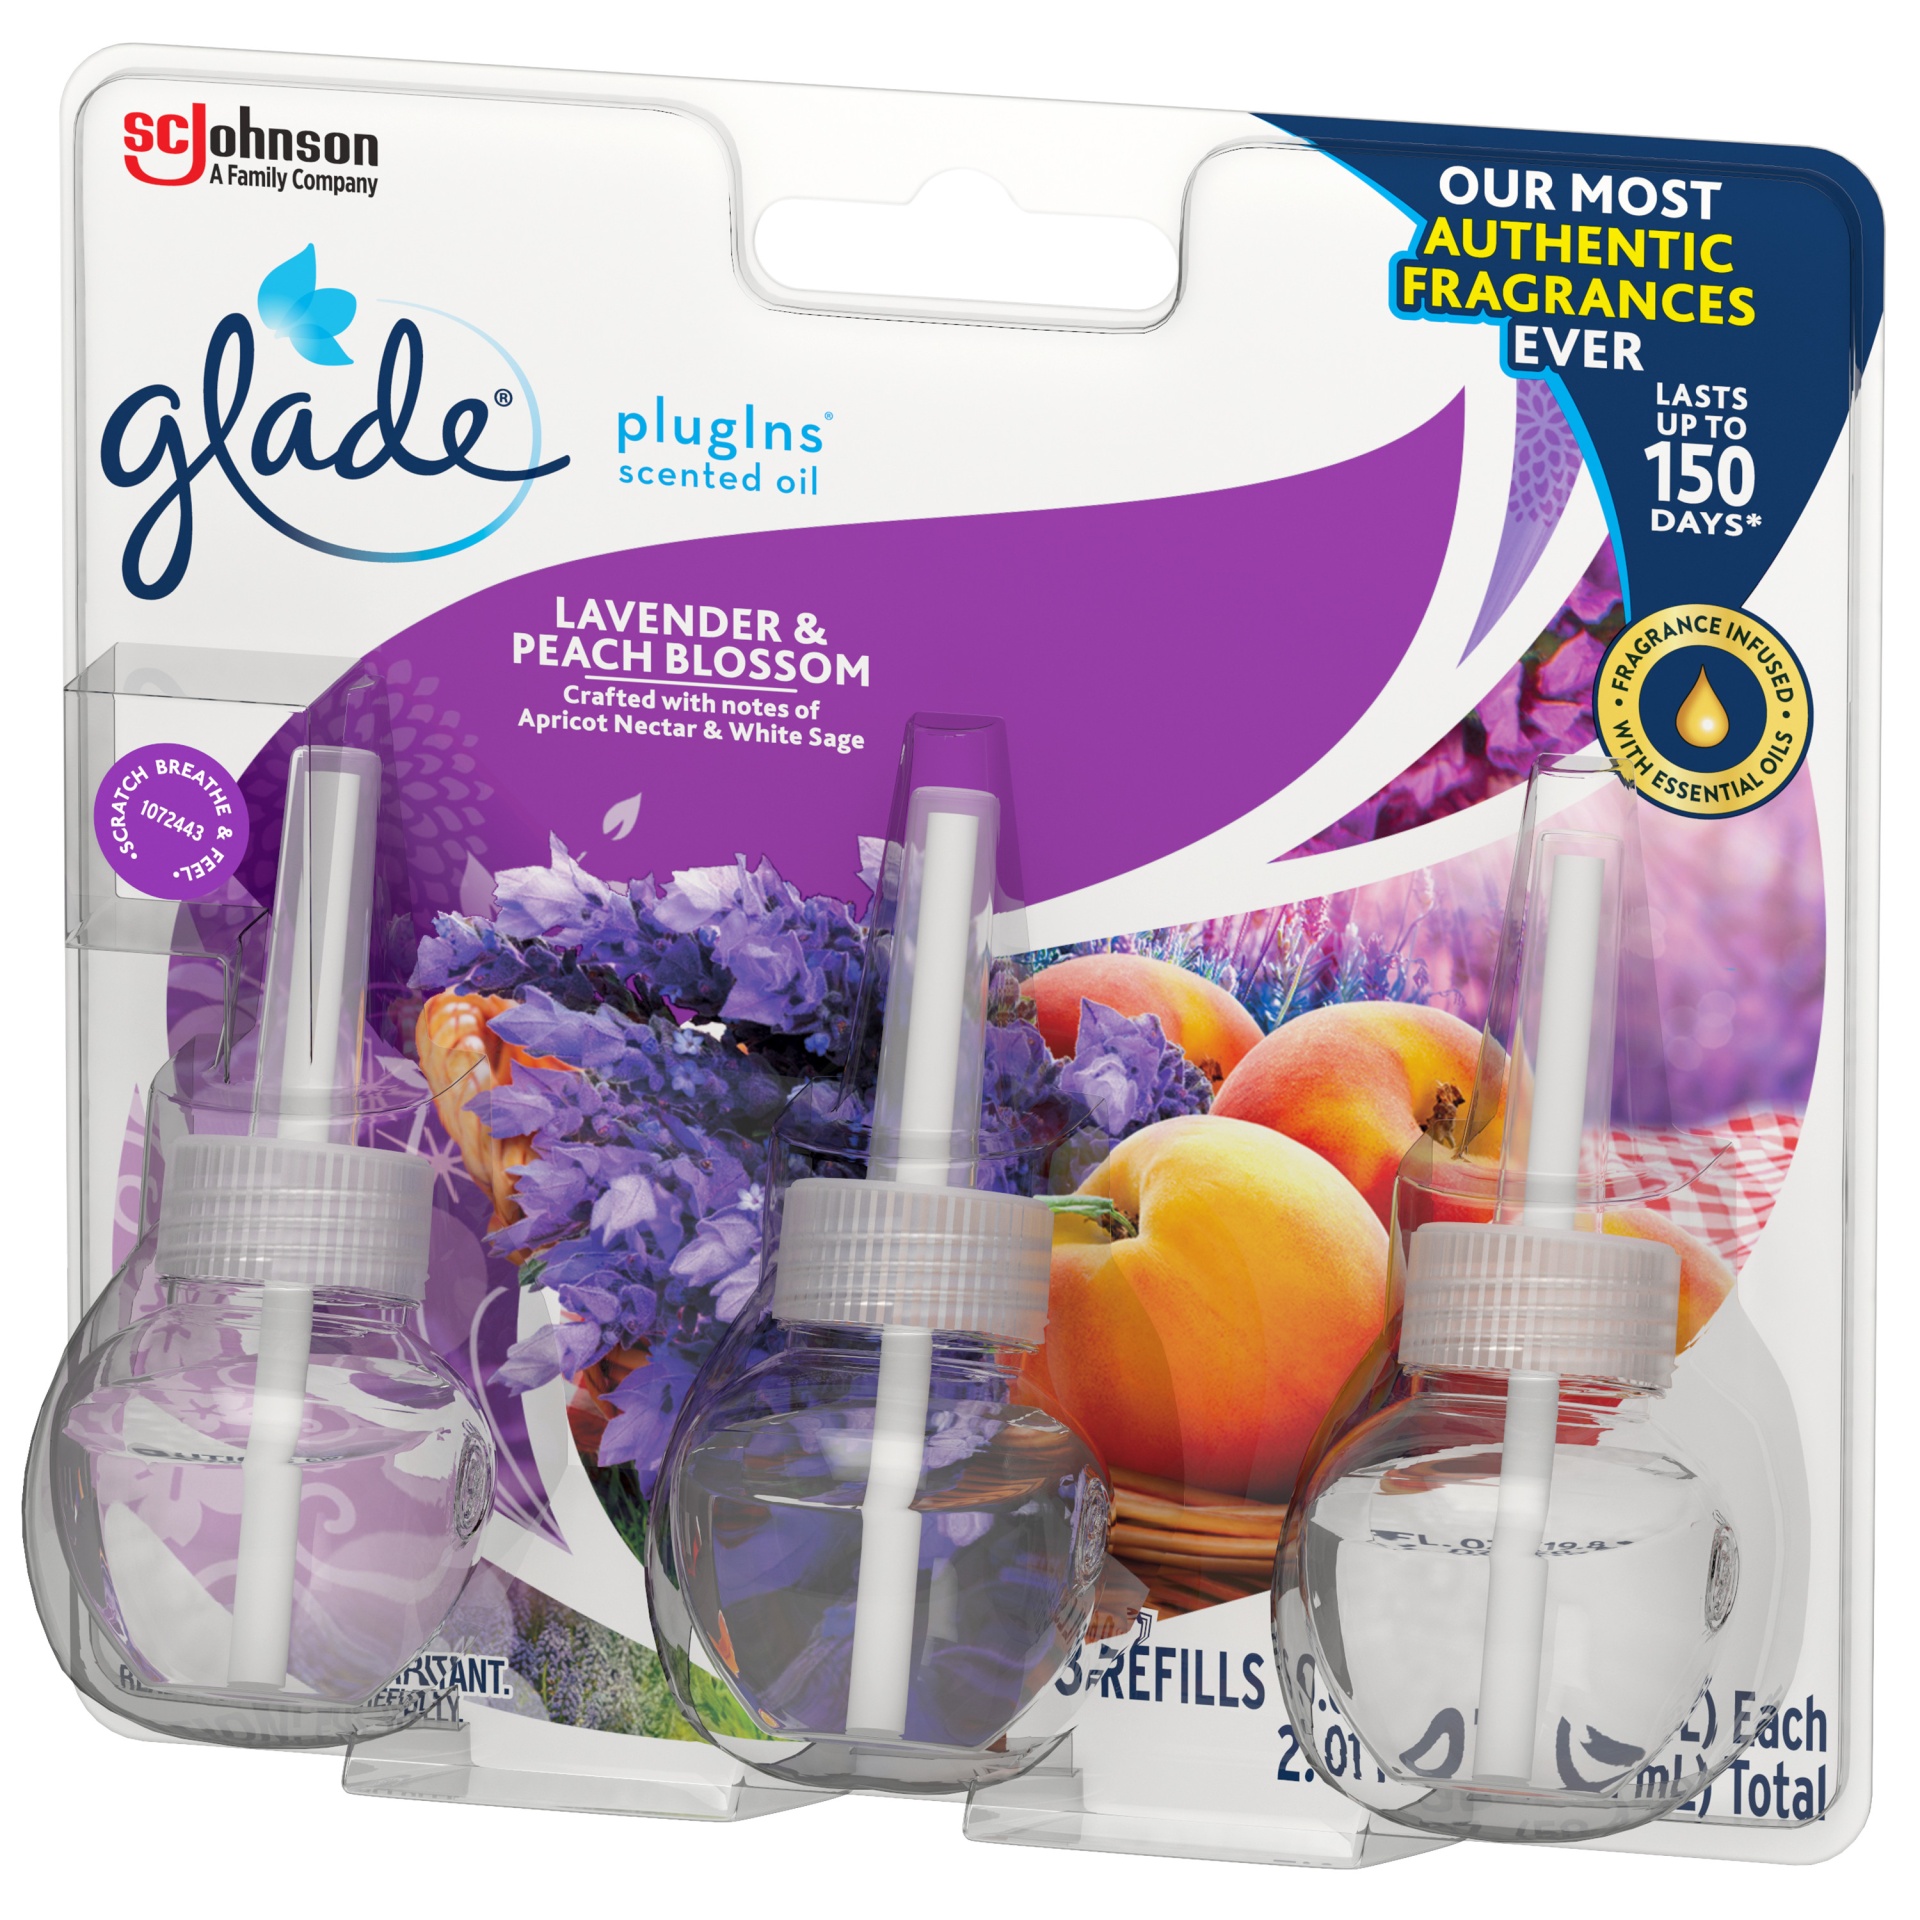 slide 7 of 7, Glade PlugIns Scented Oil Air Freshener Refill, Lavender & Peach Blossom, 3 ct